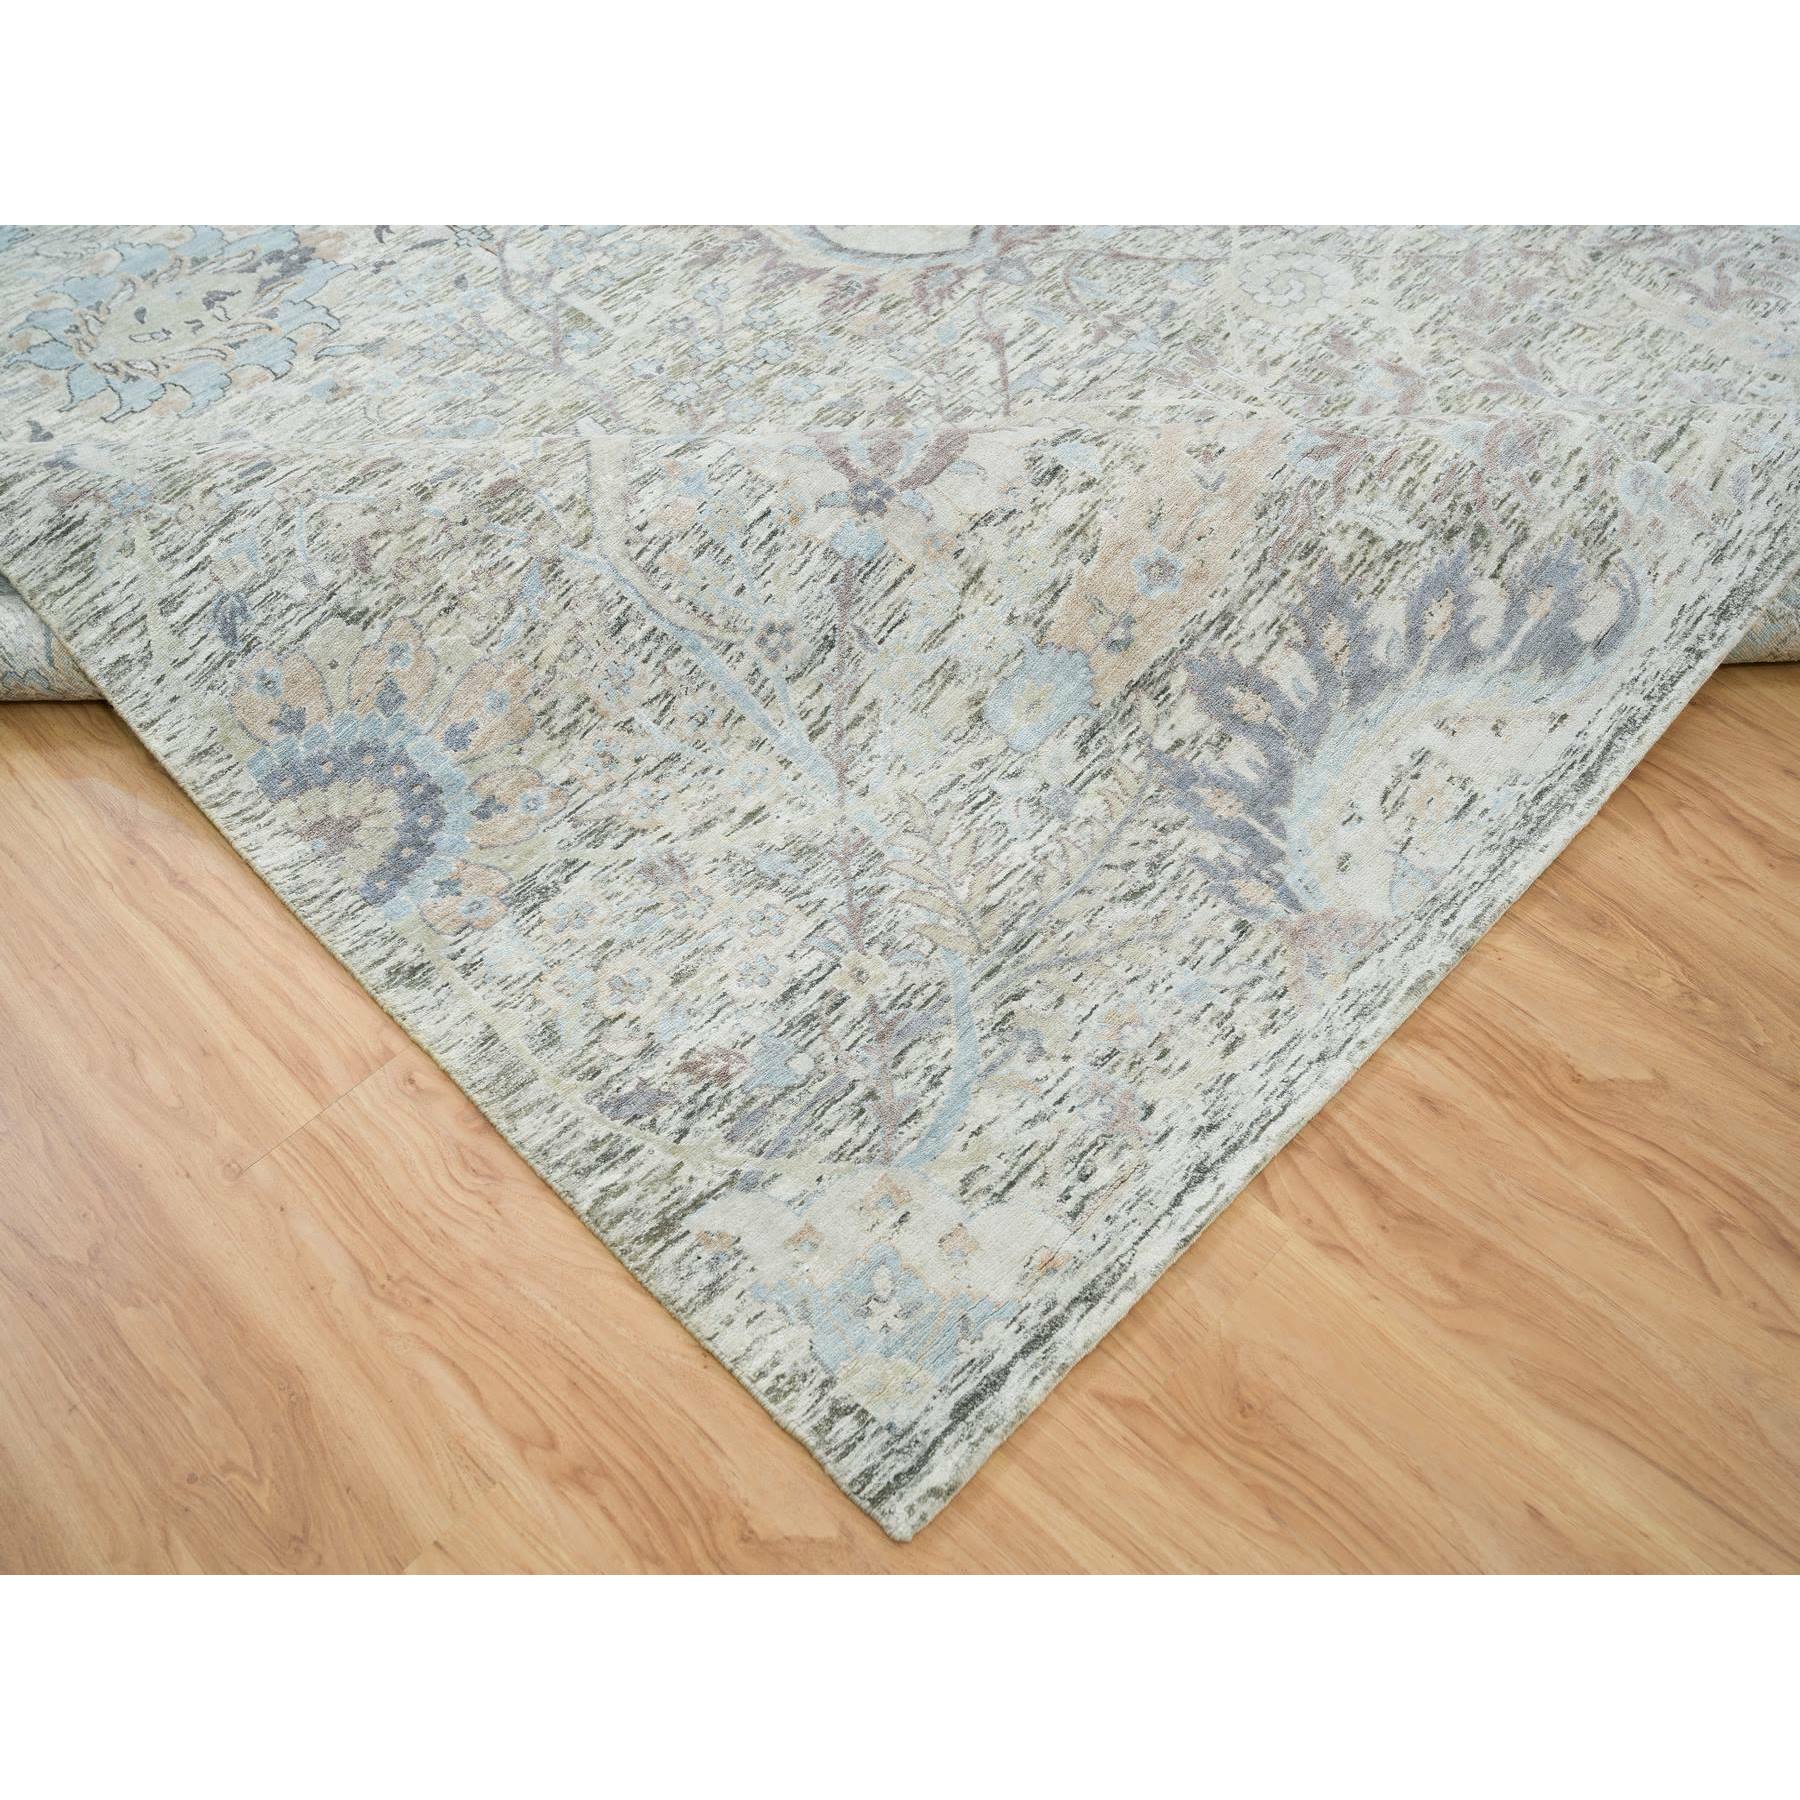  Silk Hand-Knotted Area Rug 12'0